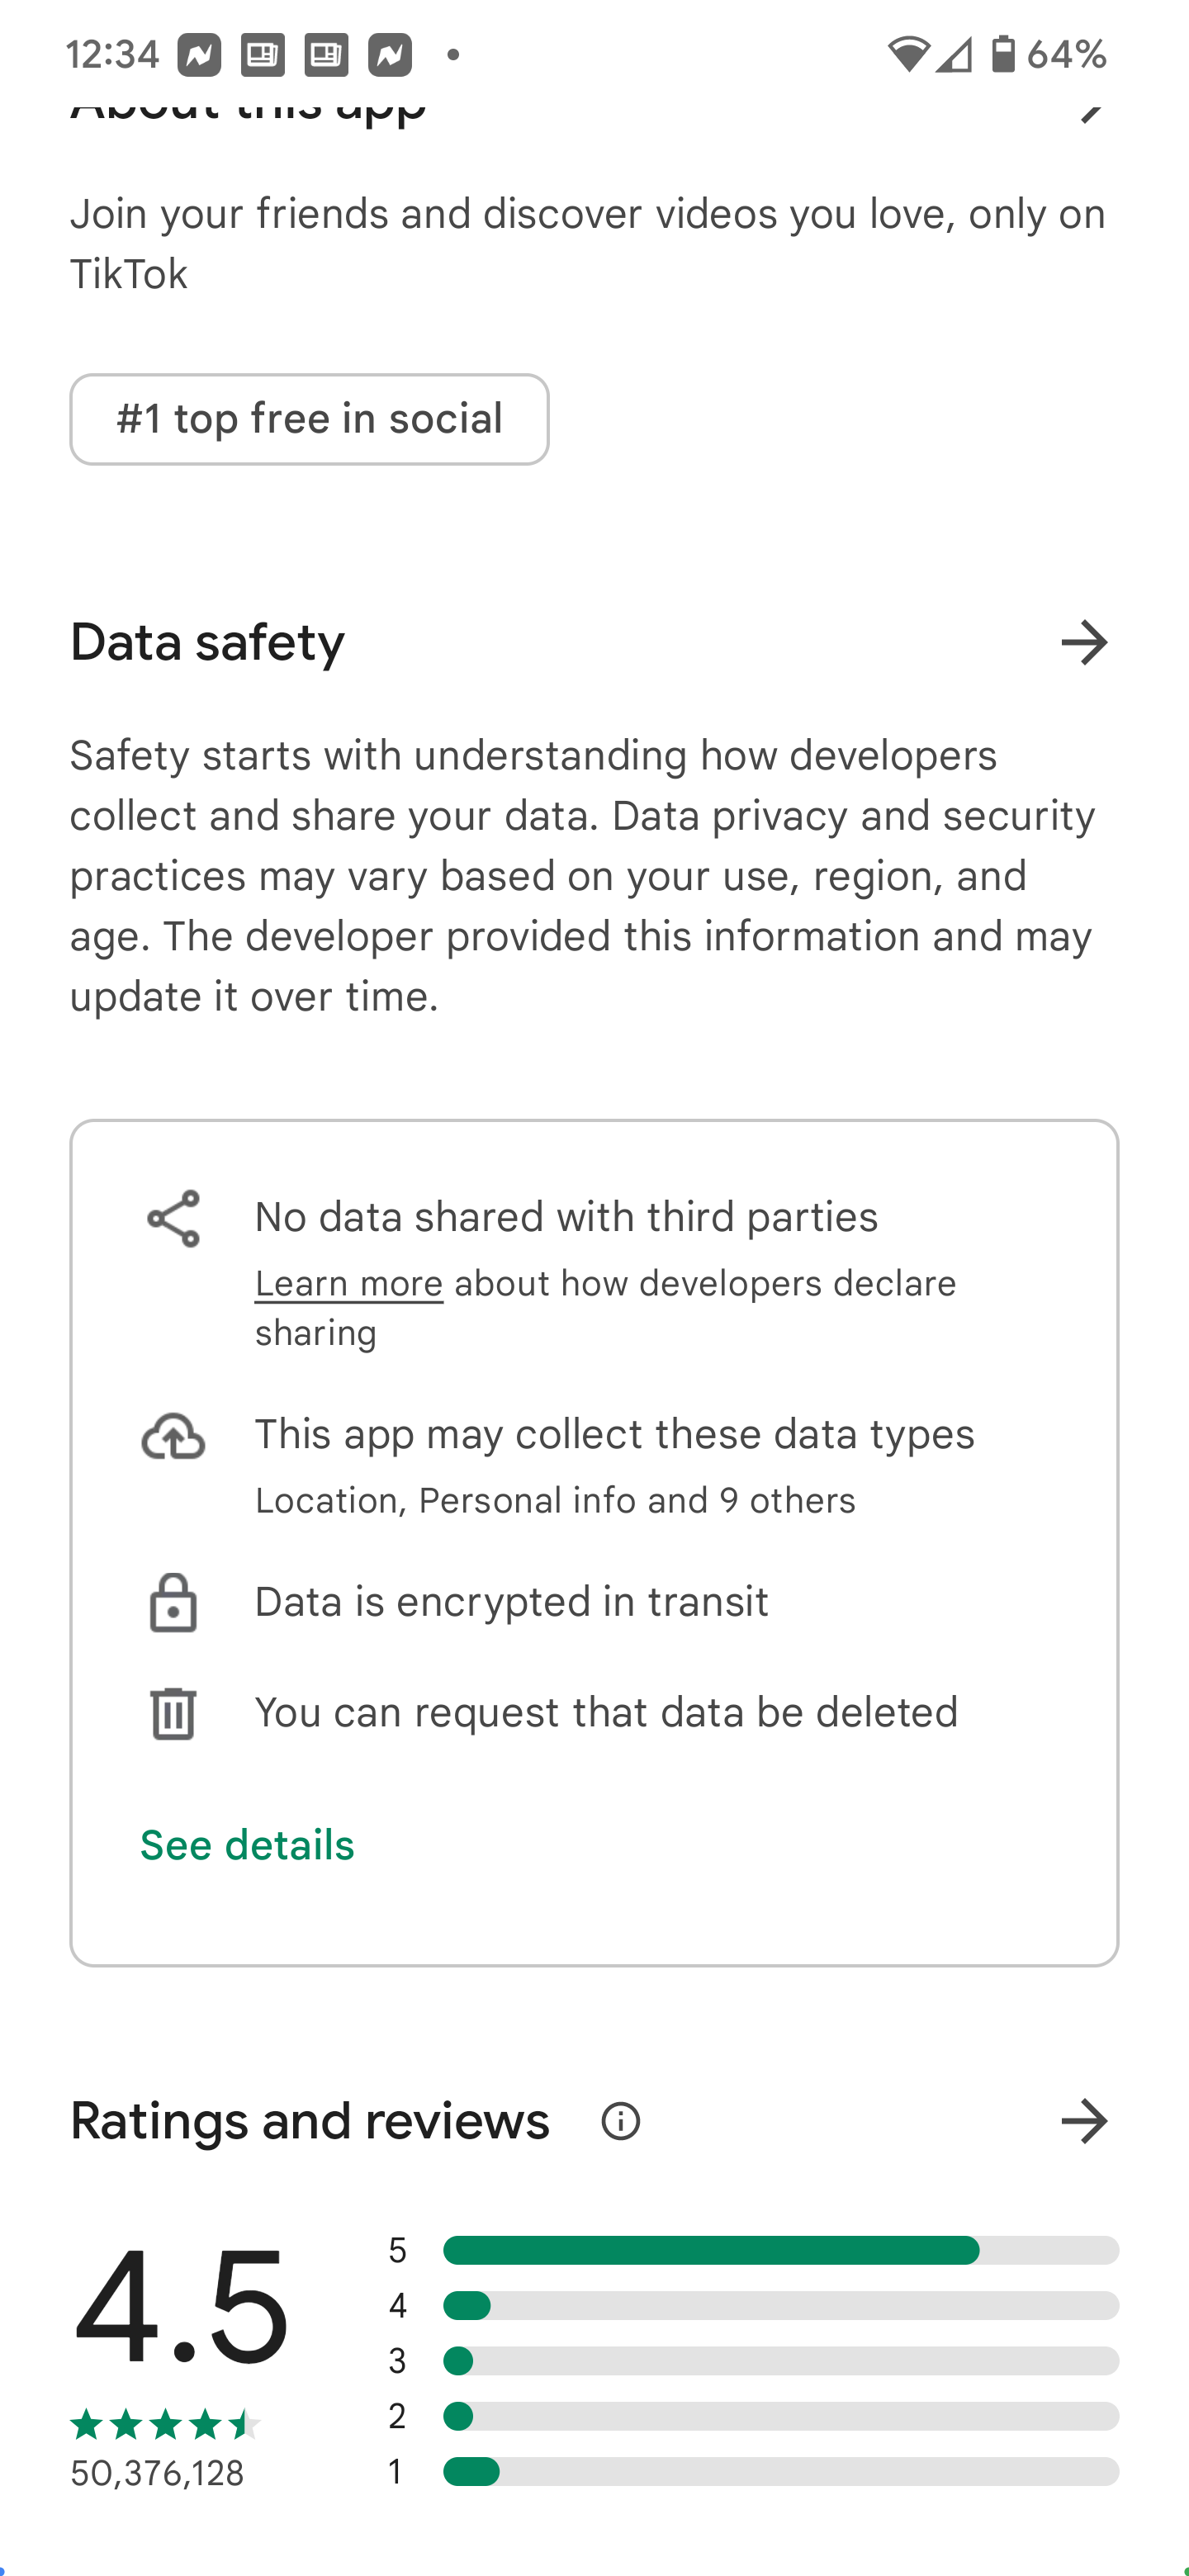 The Data safety listing in the Google Play Store for TikTok - Google demands Android app developers turn over Data safety info by July 20th